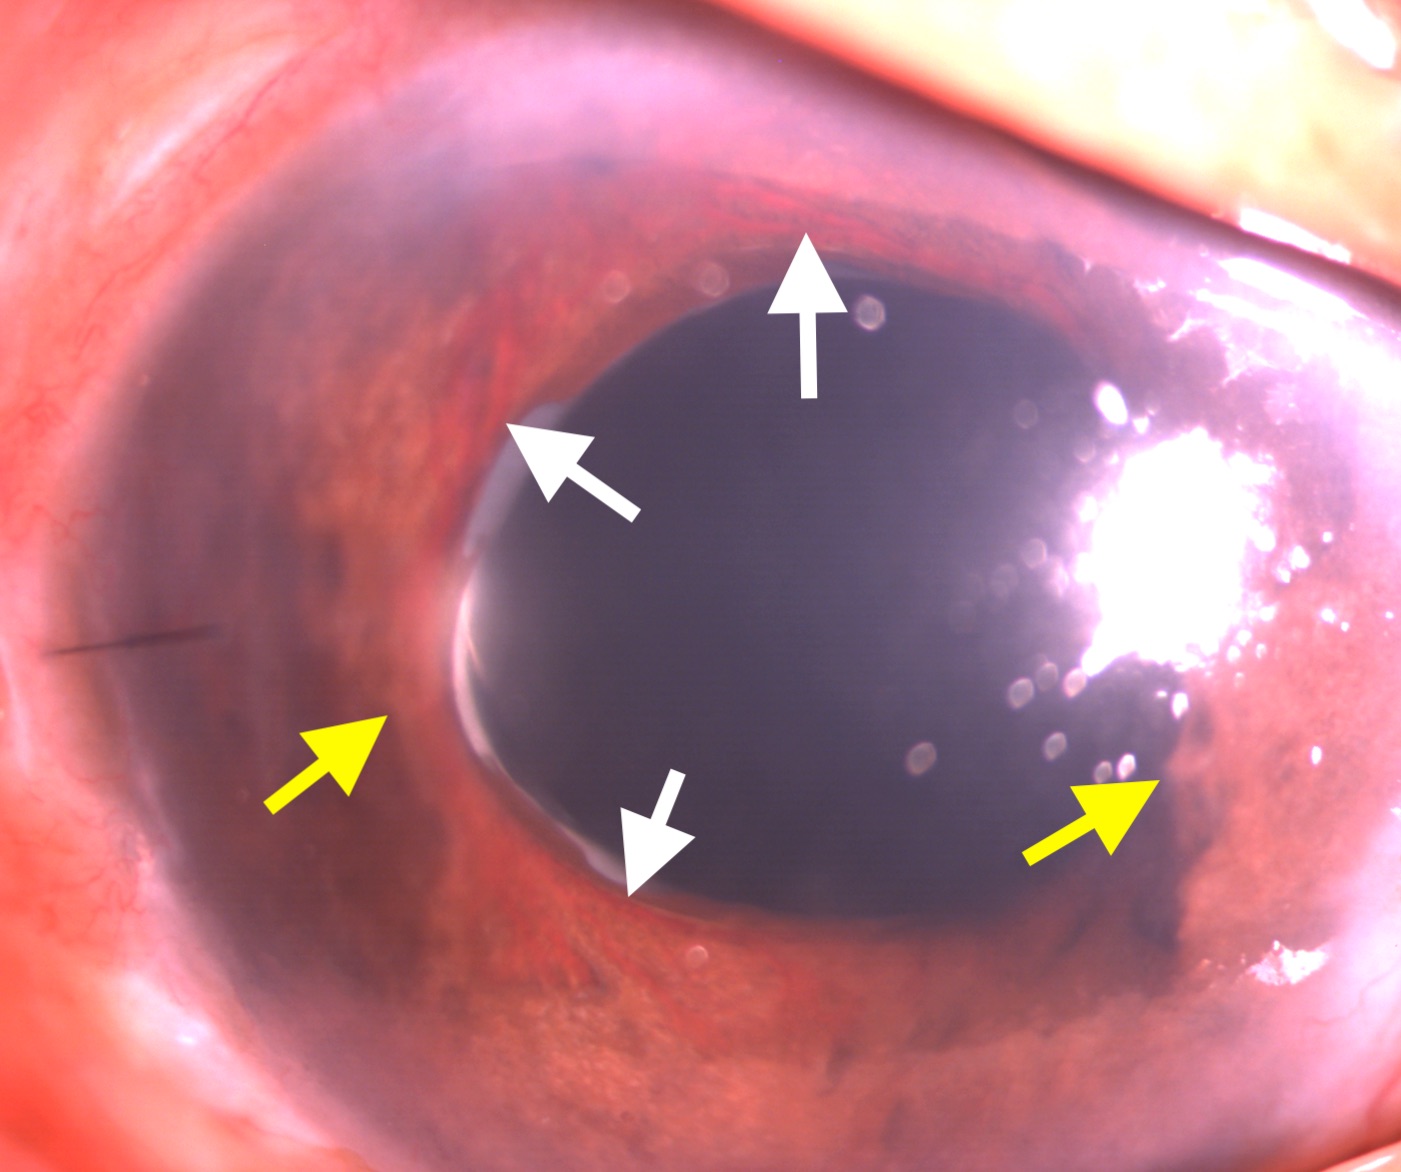 Figure 2- Neovascularization of iris (white arrow marks) and peripheral anterior synechia (yellow arrow marks) in a patient w